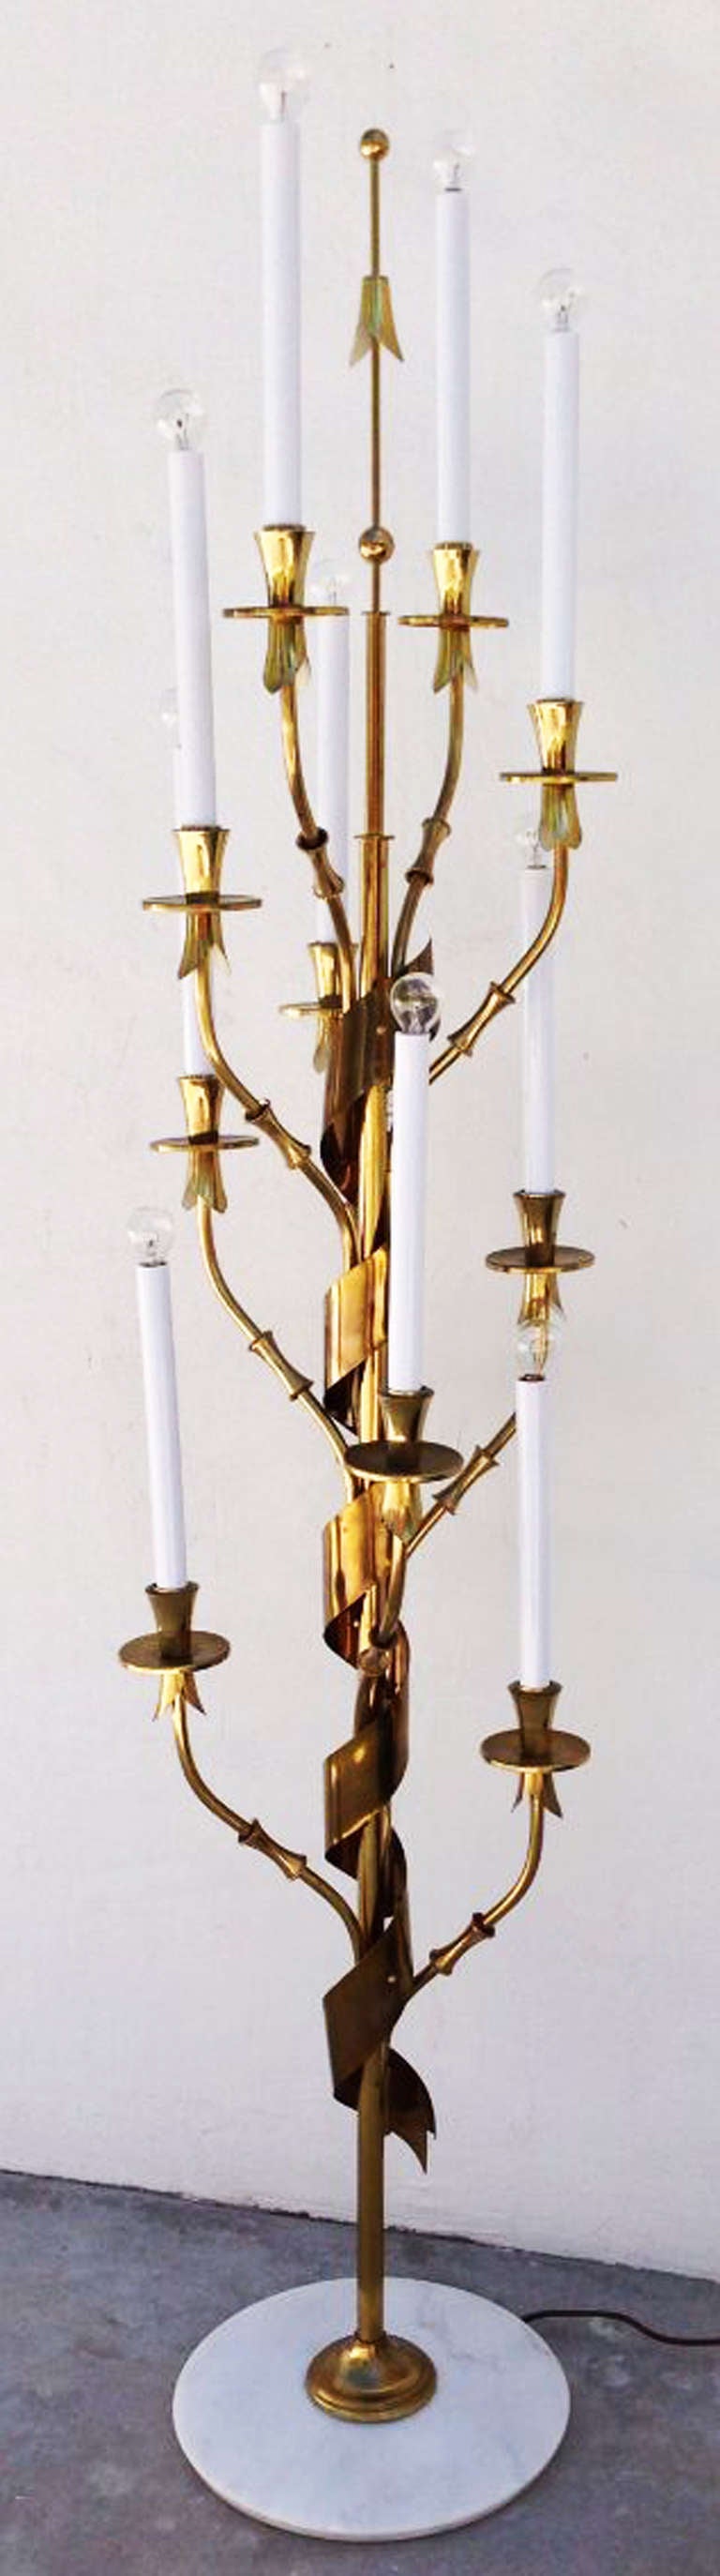 A fine and rare vintage Stilnovo standing brass candelabra floor lamp. Authentic signed item. A polished white Carrara marble base supports a polished brass 